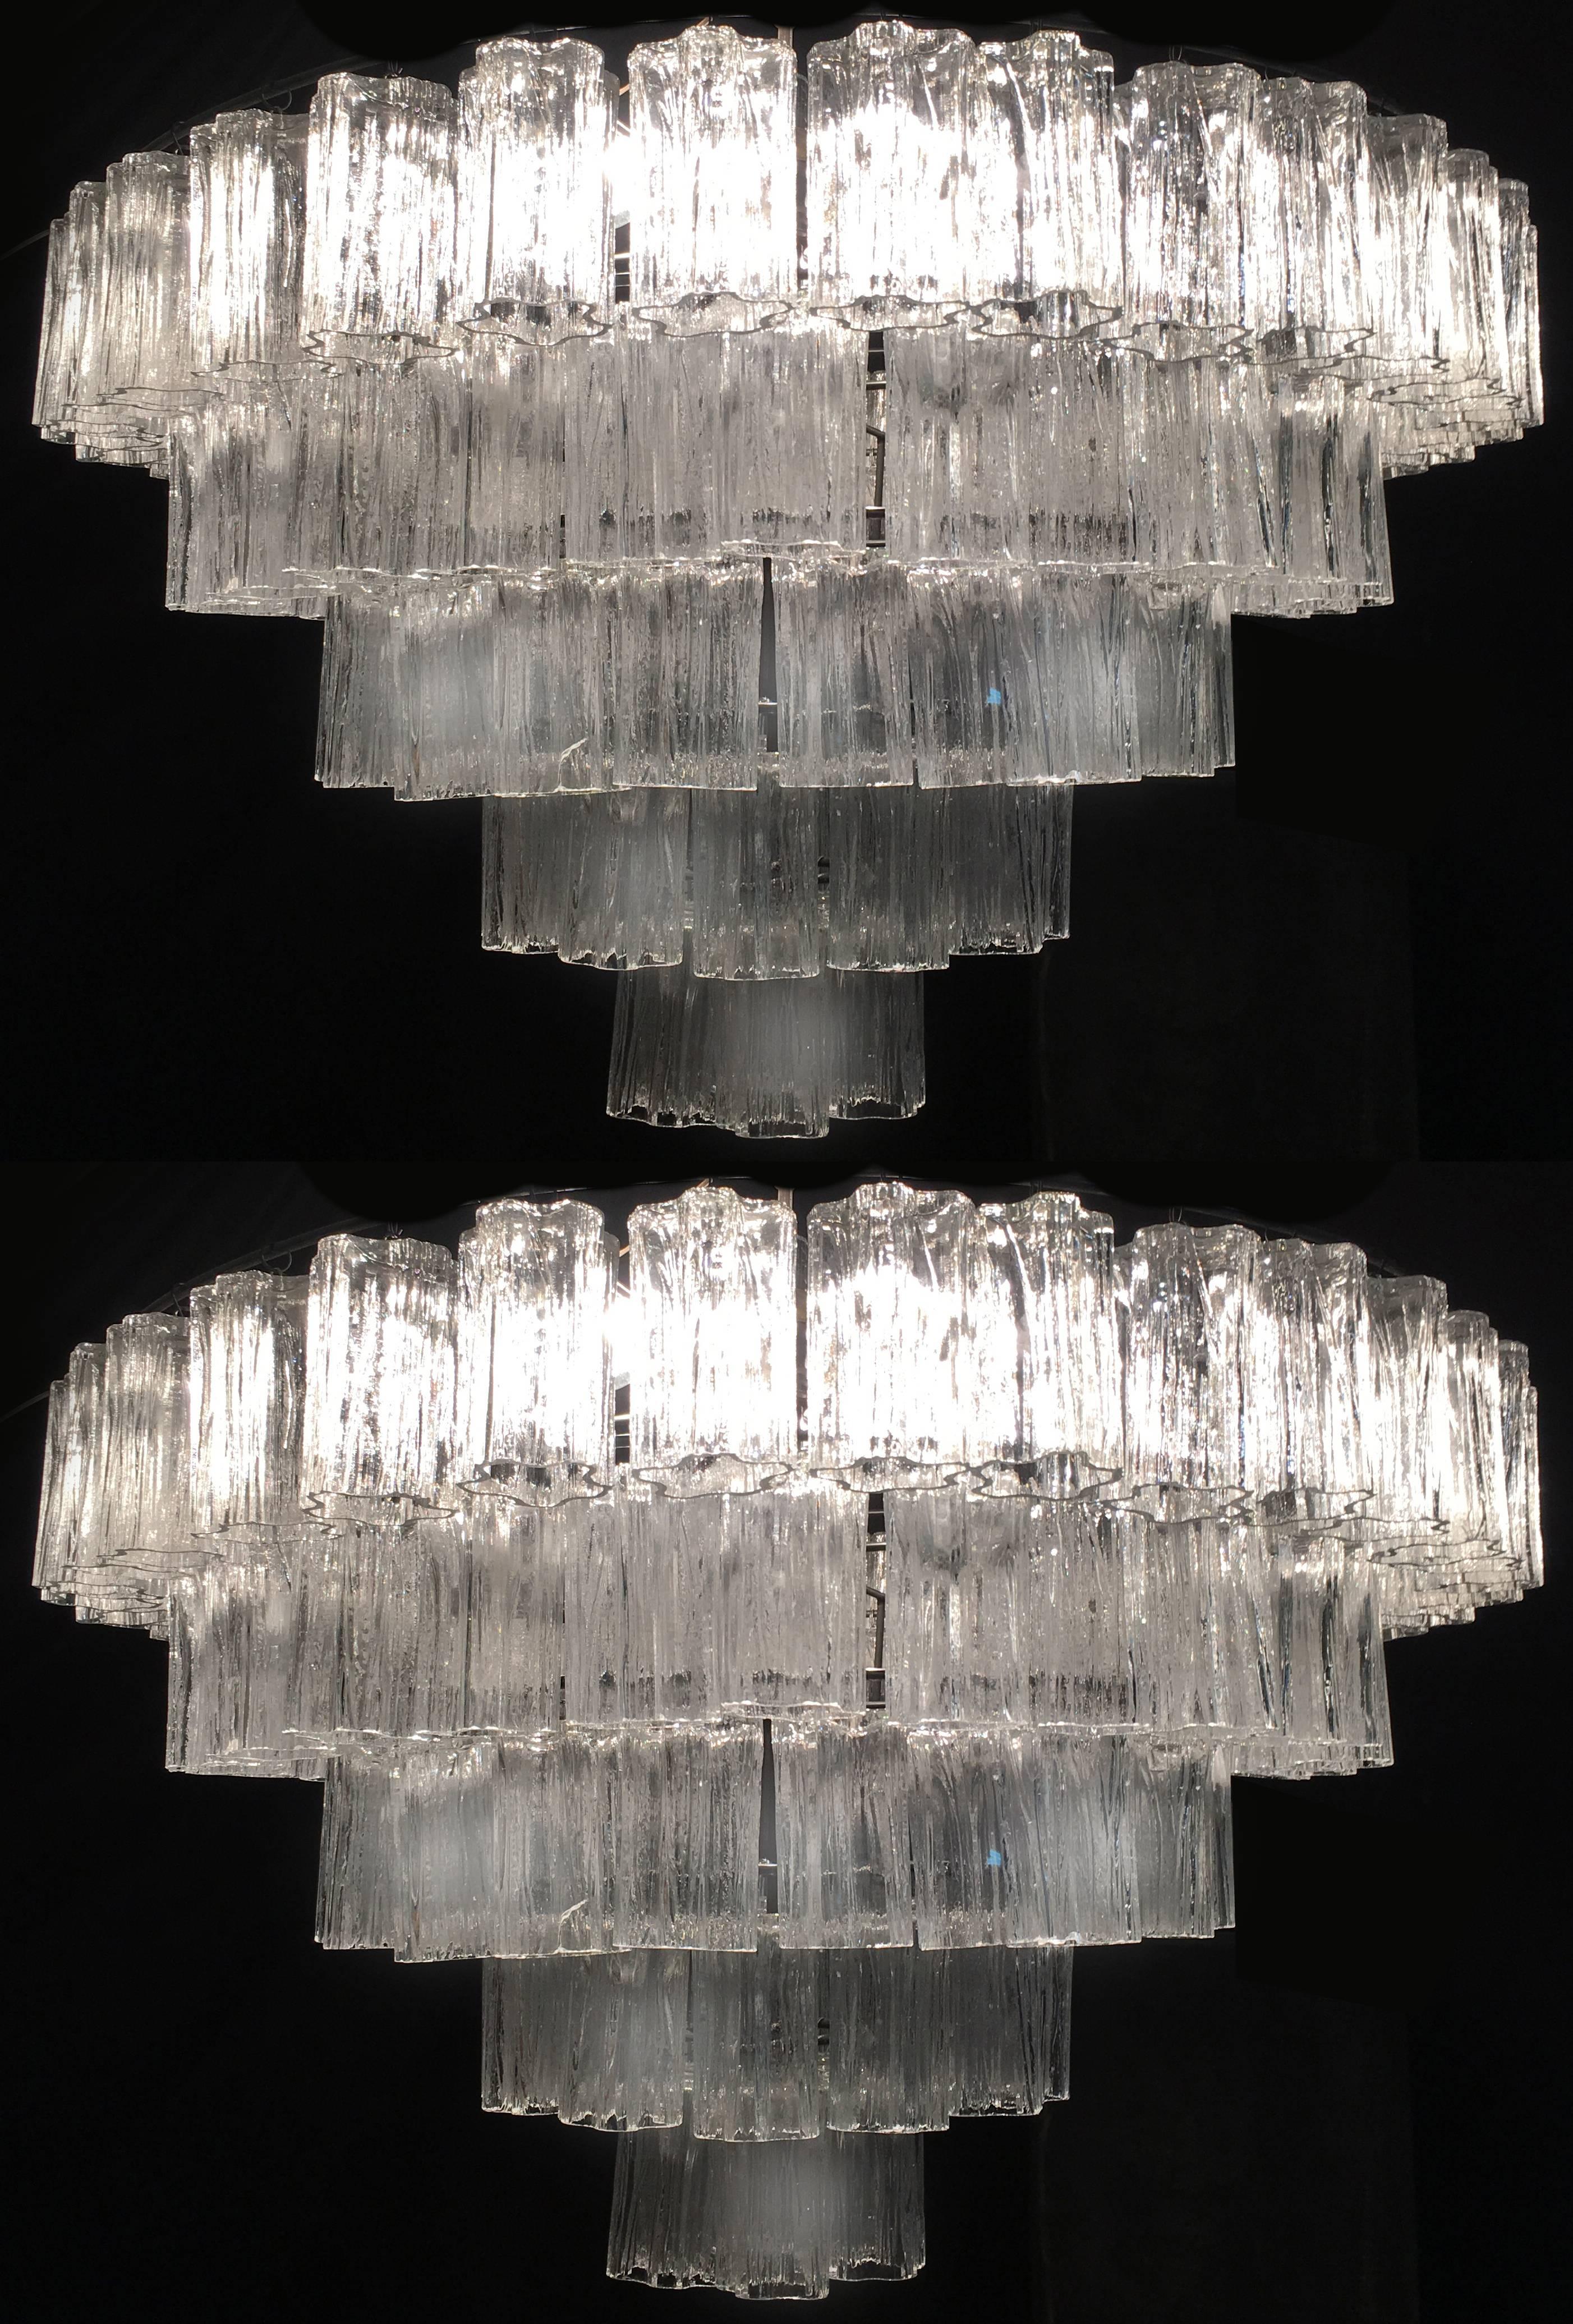 A very fine chandelier in the style Toni Zuccheri for Venini, each one composed by 100 truncated handblown cylindrical glass pieces. Measure: Height each 15 cm.